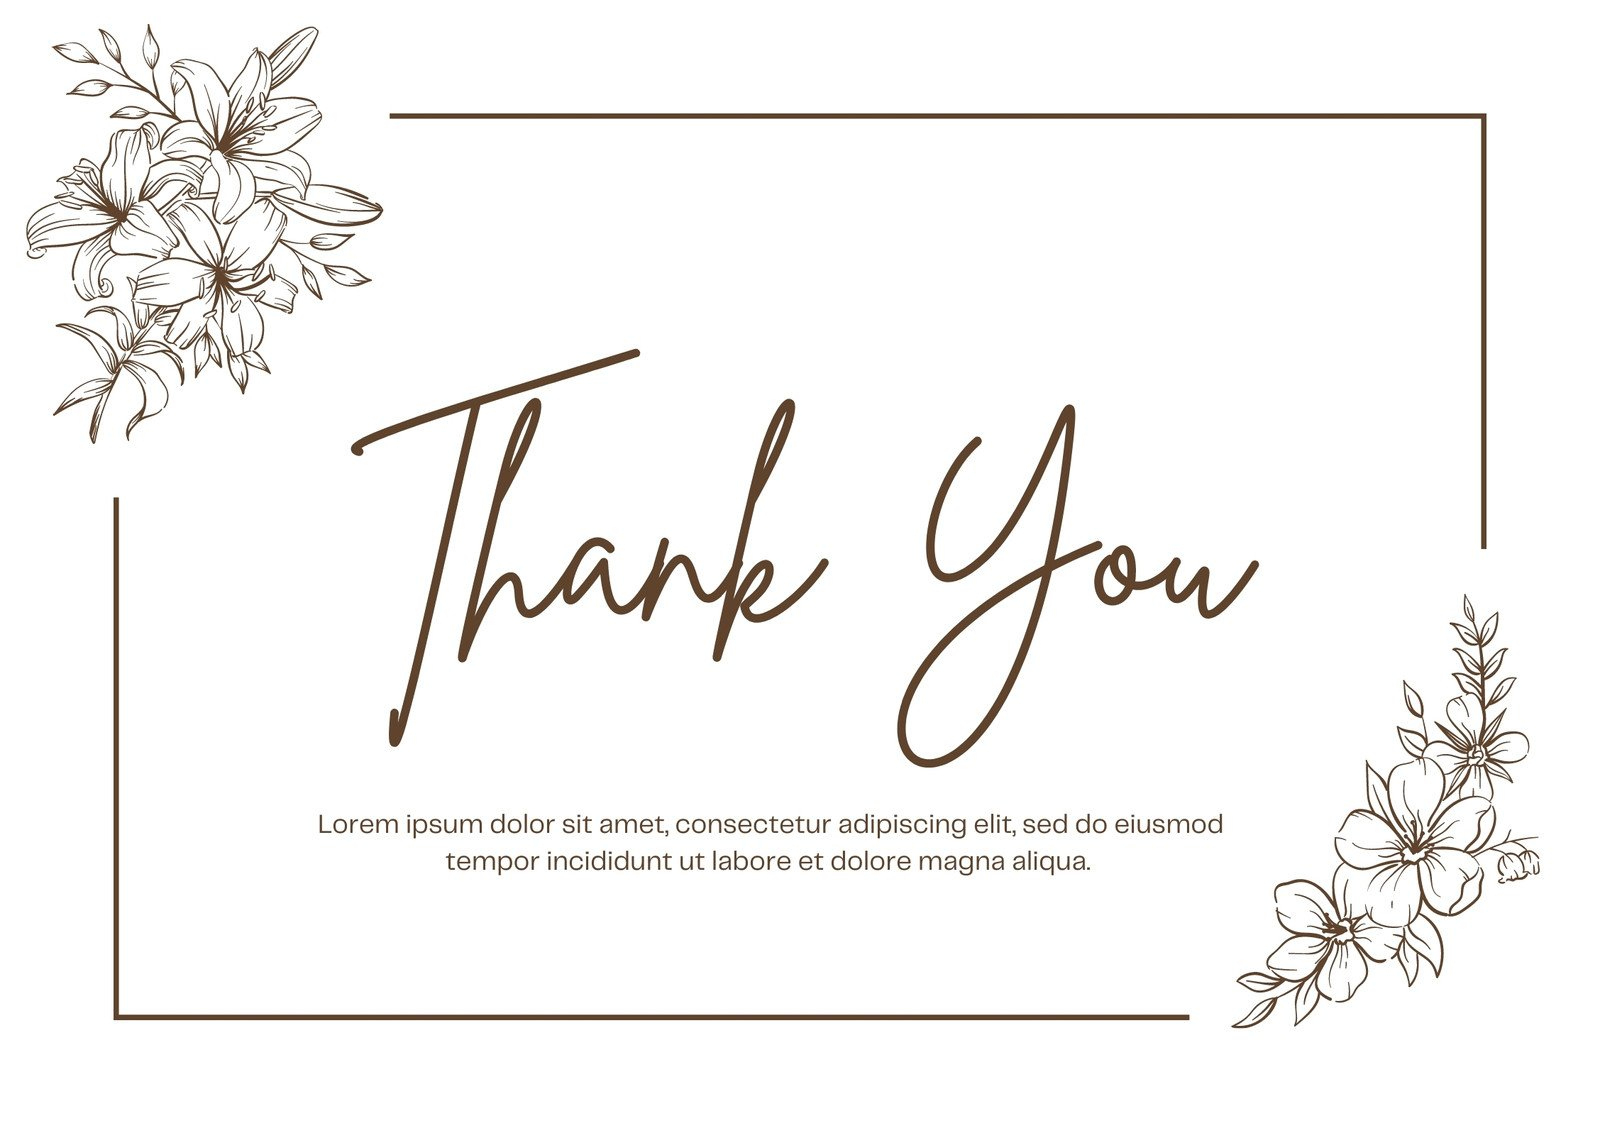 Printable, Customizable Thank You Card Templates | Canva inside Free Personalized Thank You Cards Printable